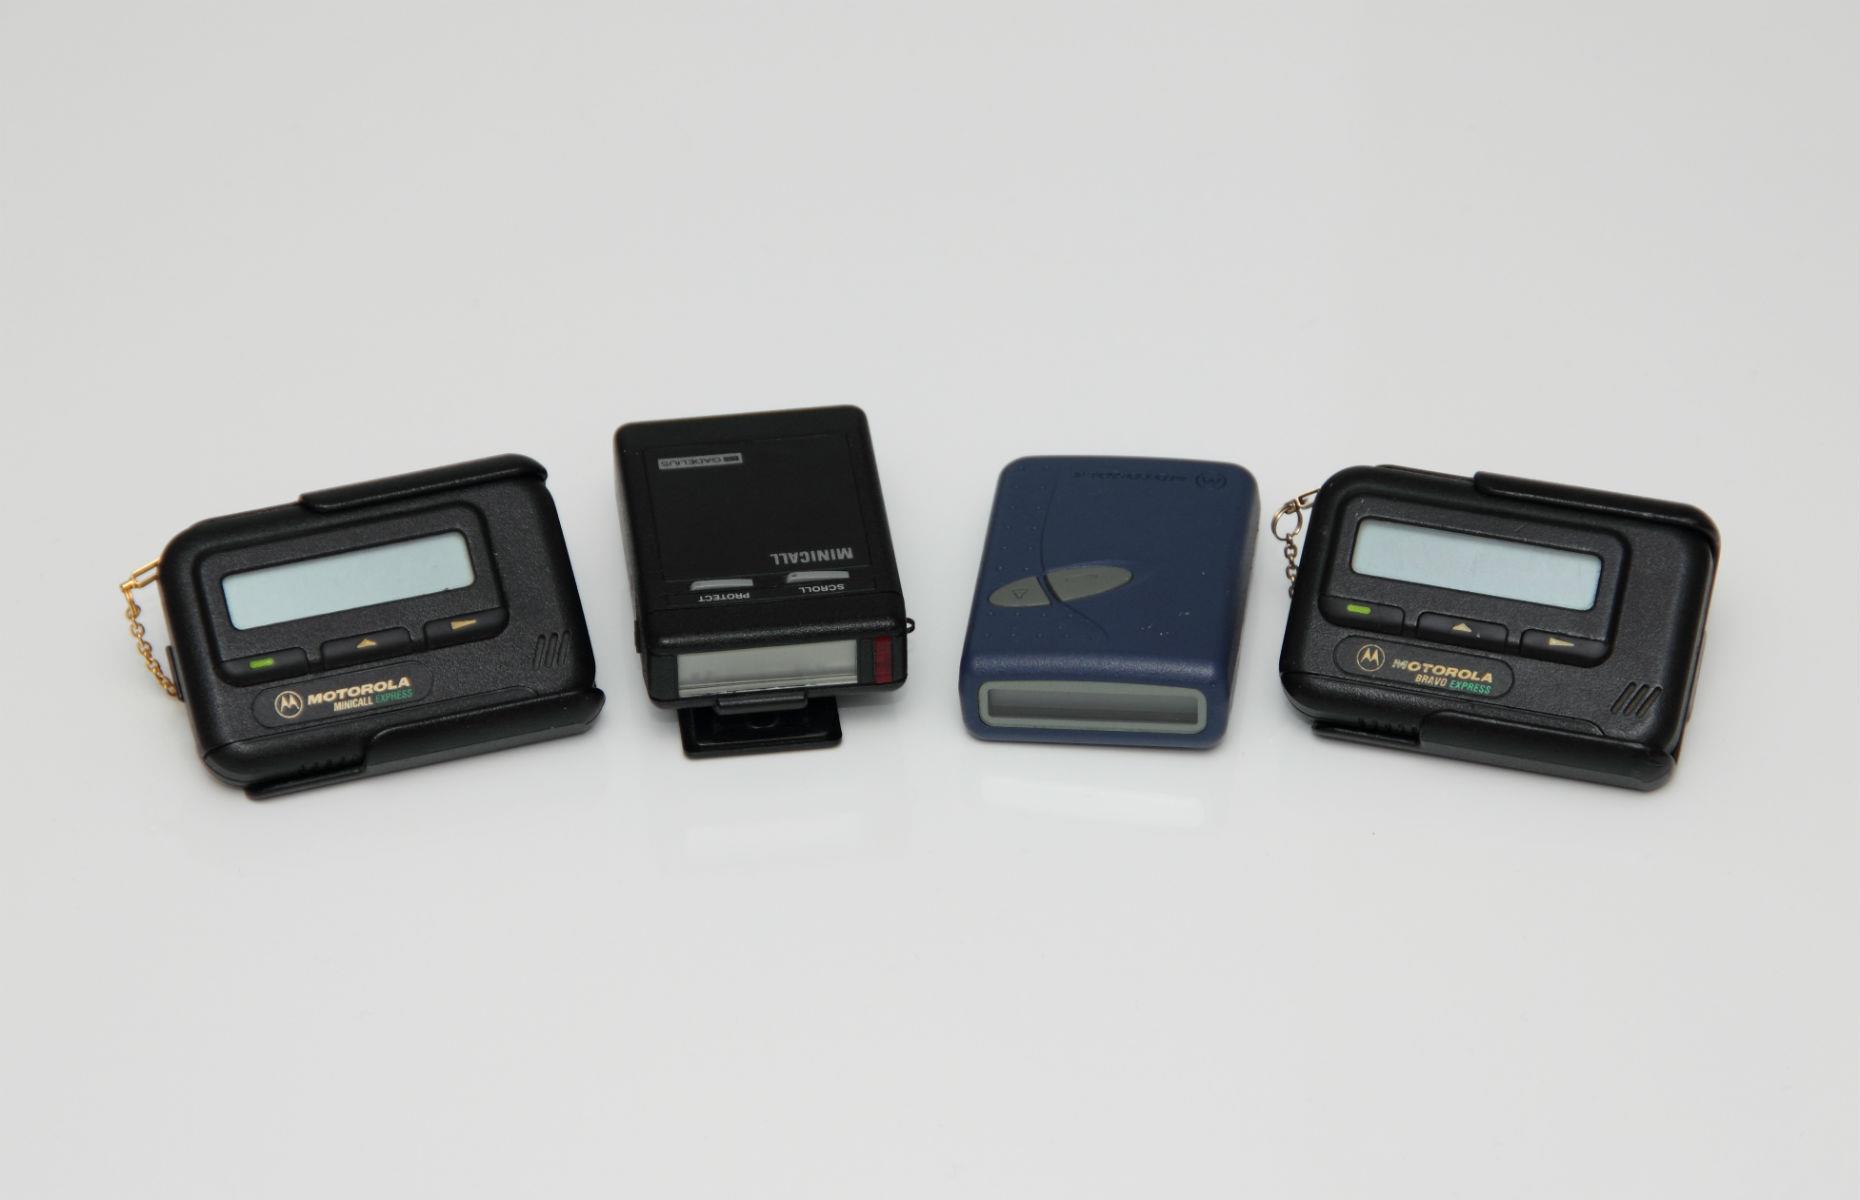 1986: pager